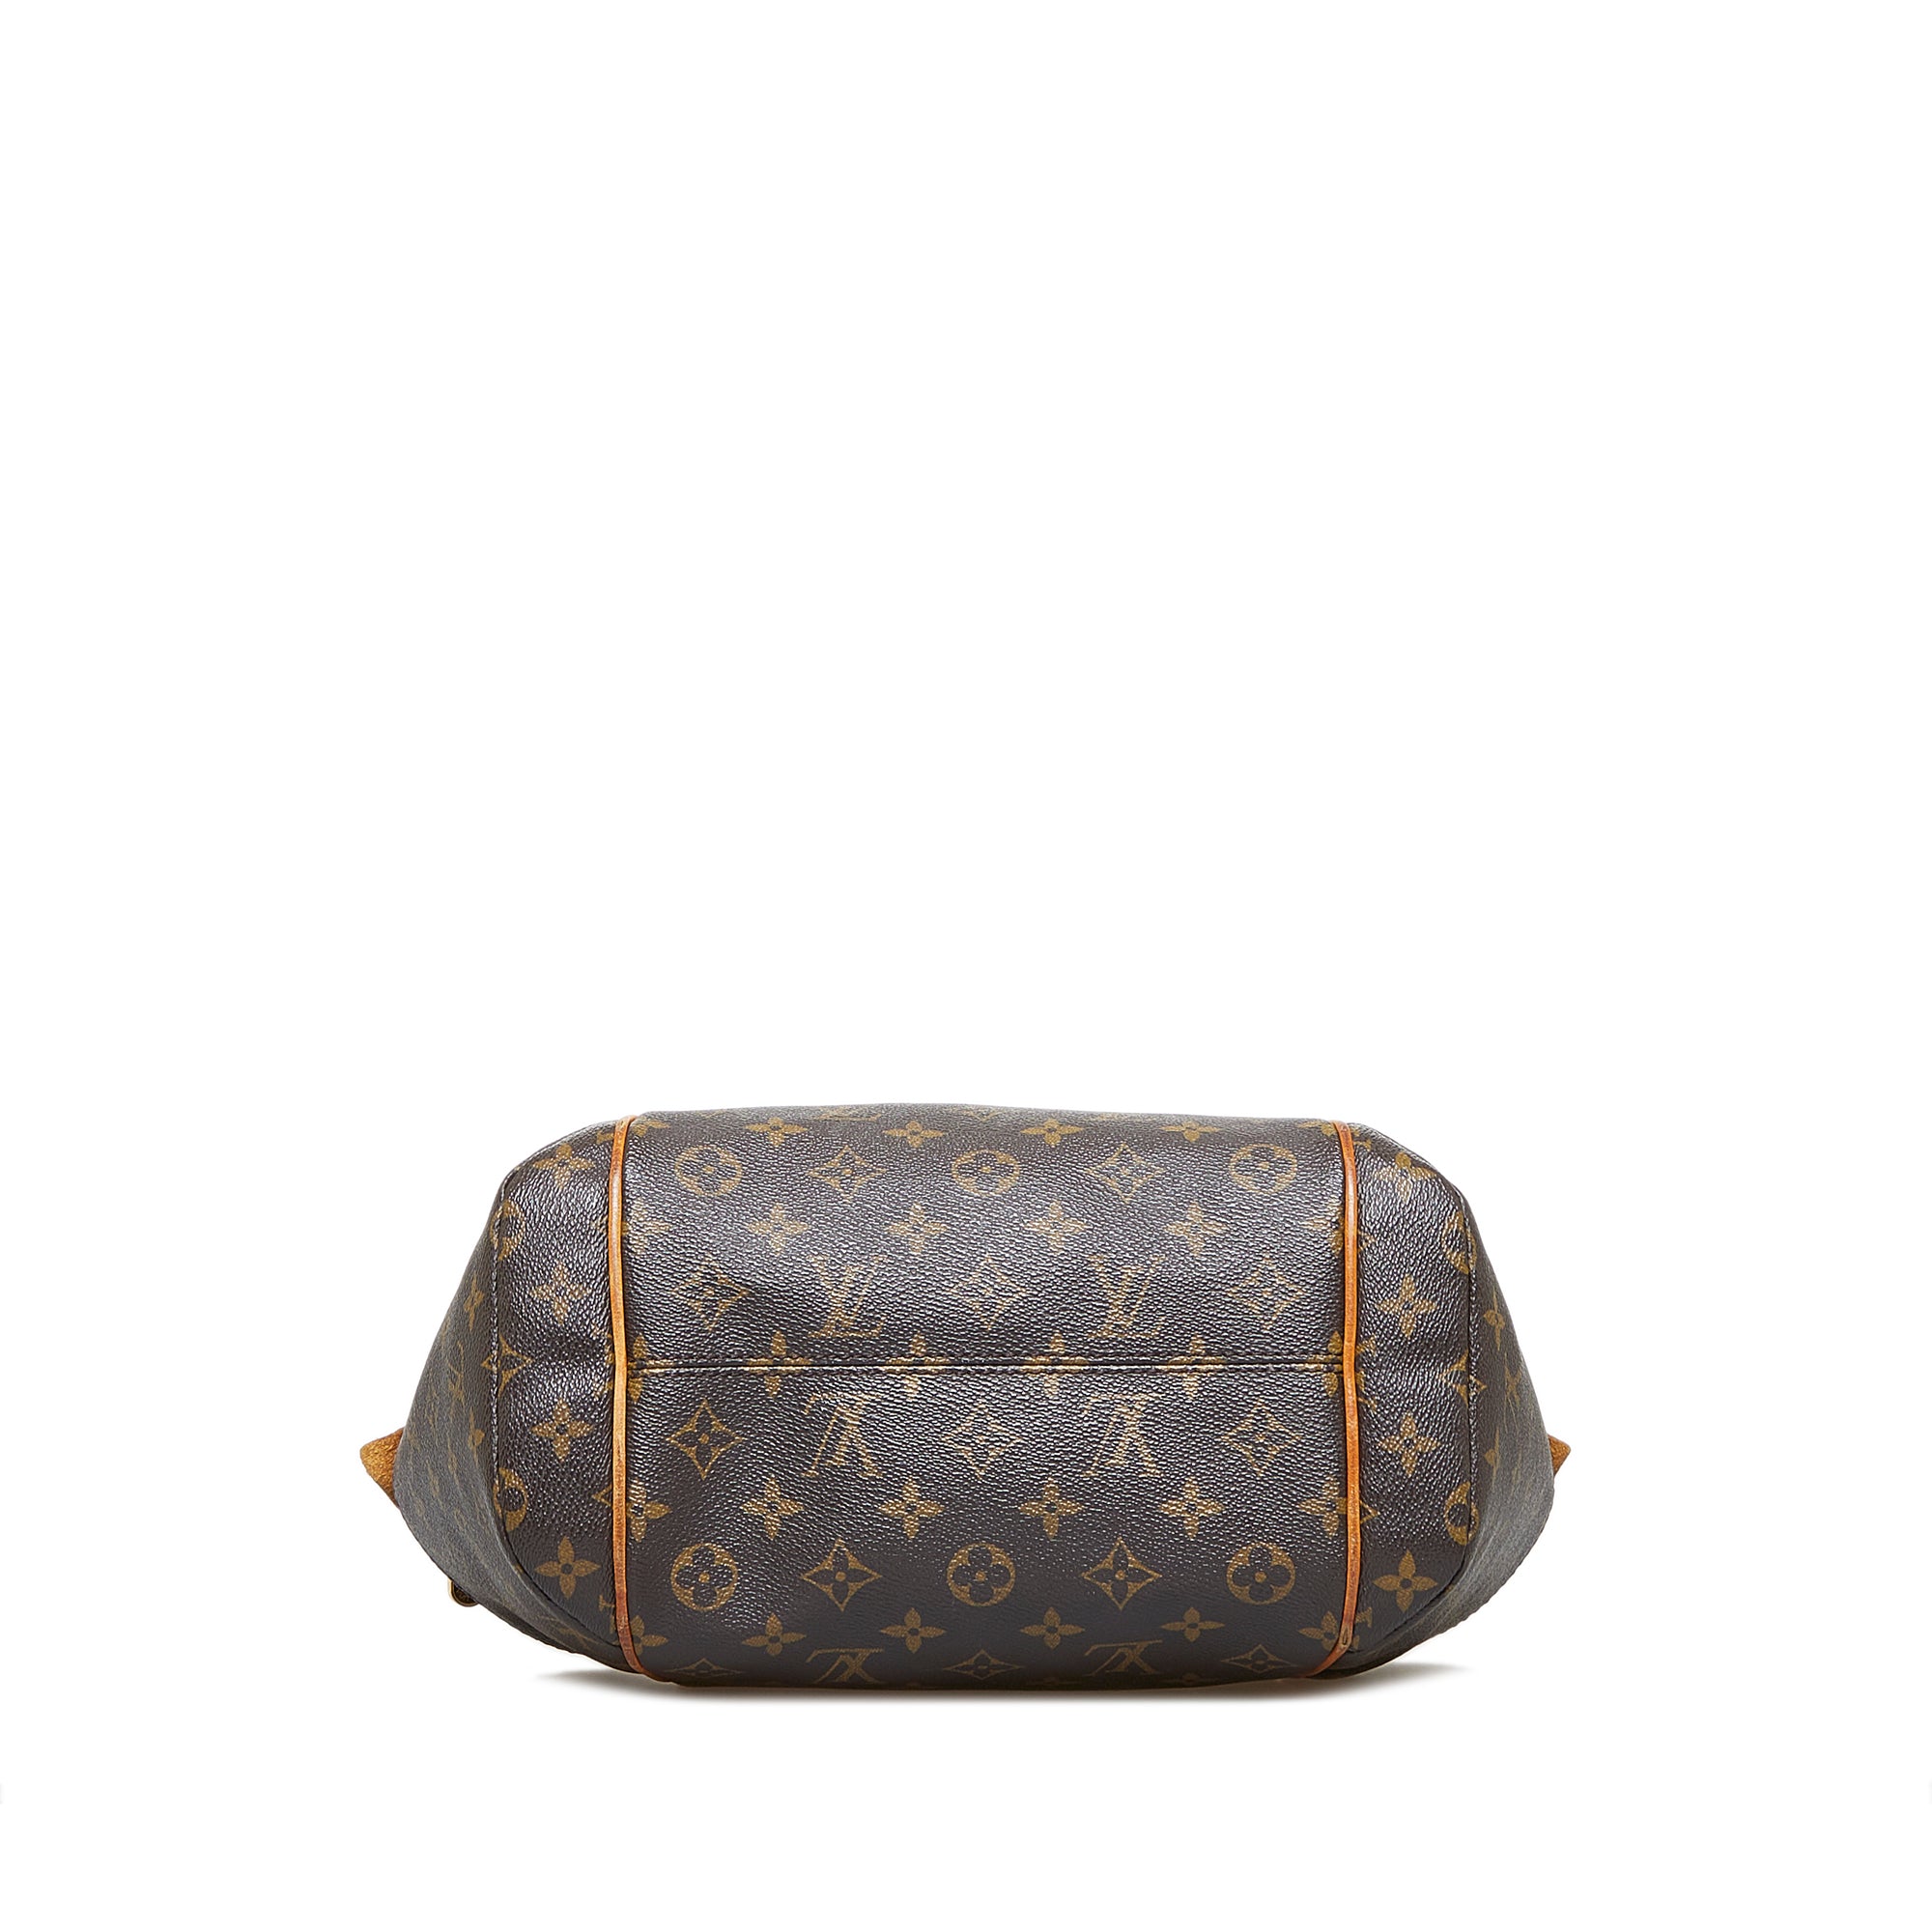 Louis Vuitton, Bags, Sold Authentic Lv Totally Pm Monogram Purse